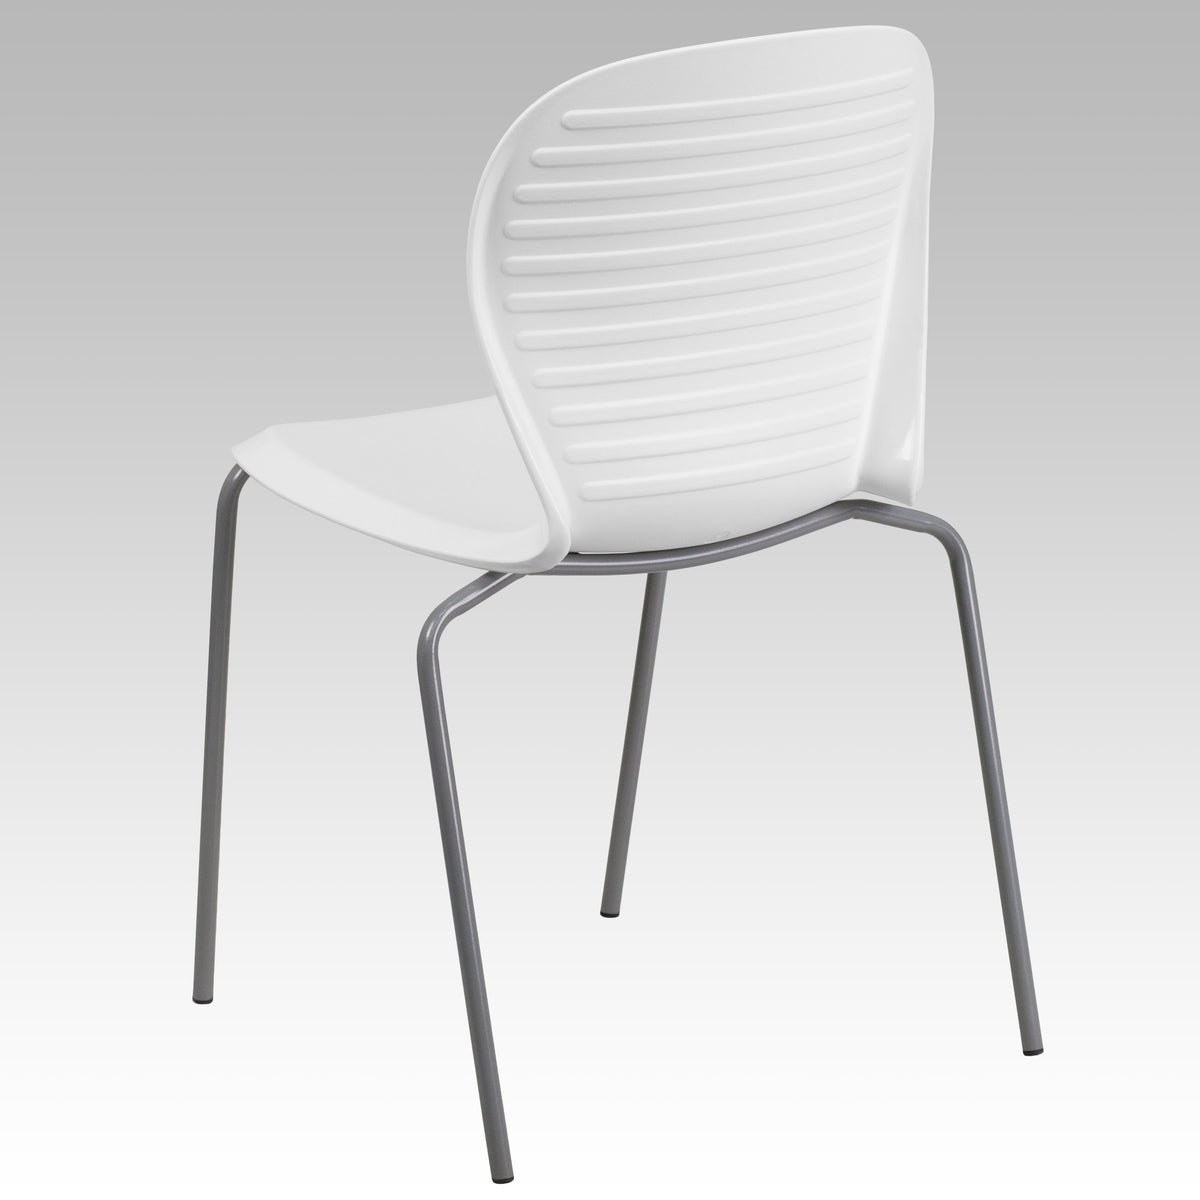 White |#| 551 lb. Capacity Contemporary White Ribbed Back Design Stack Chair